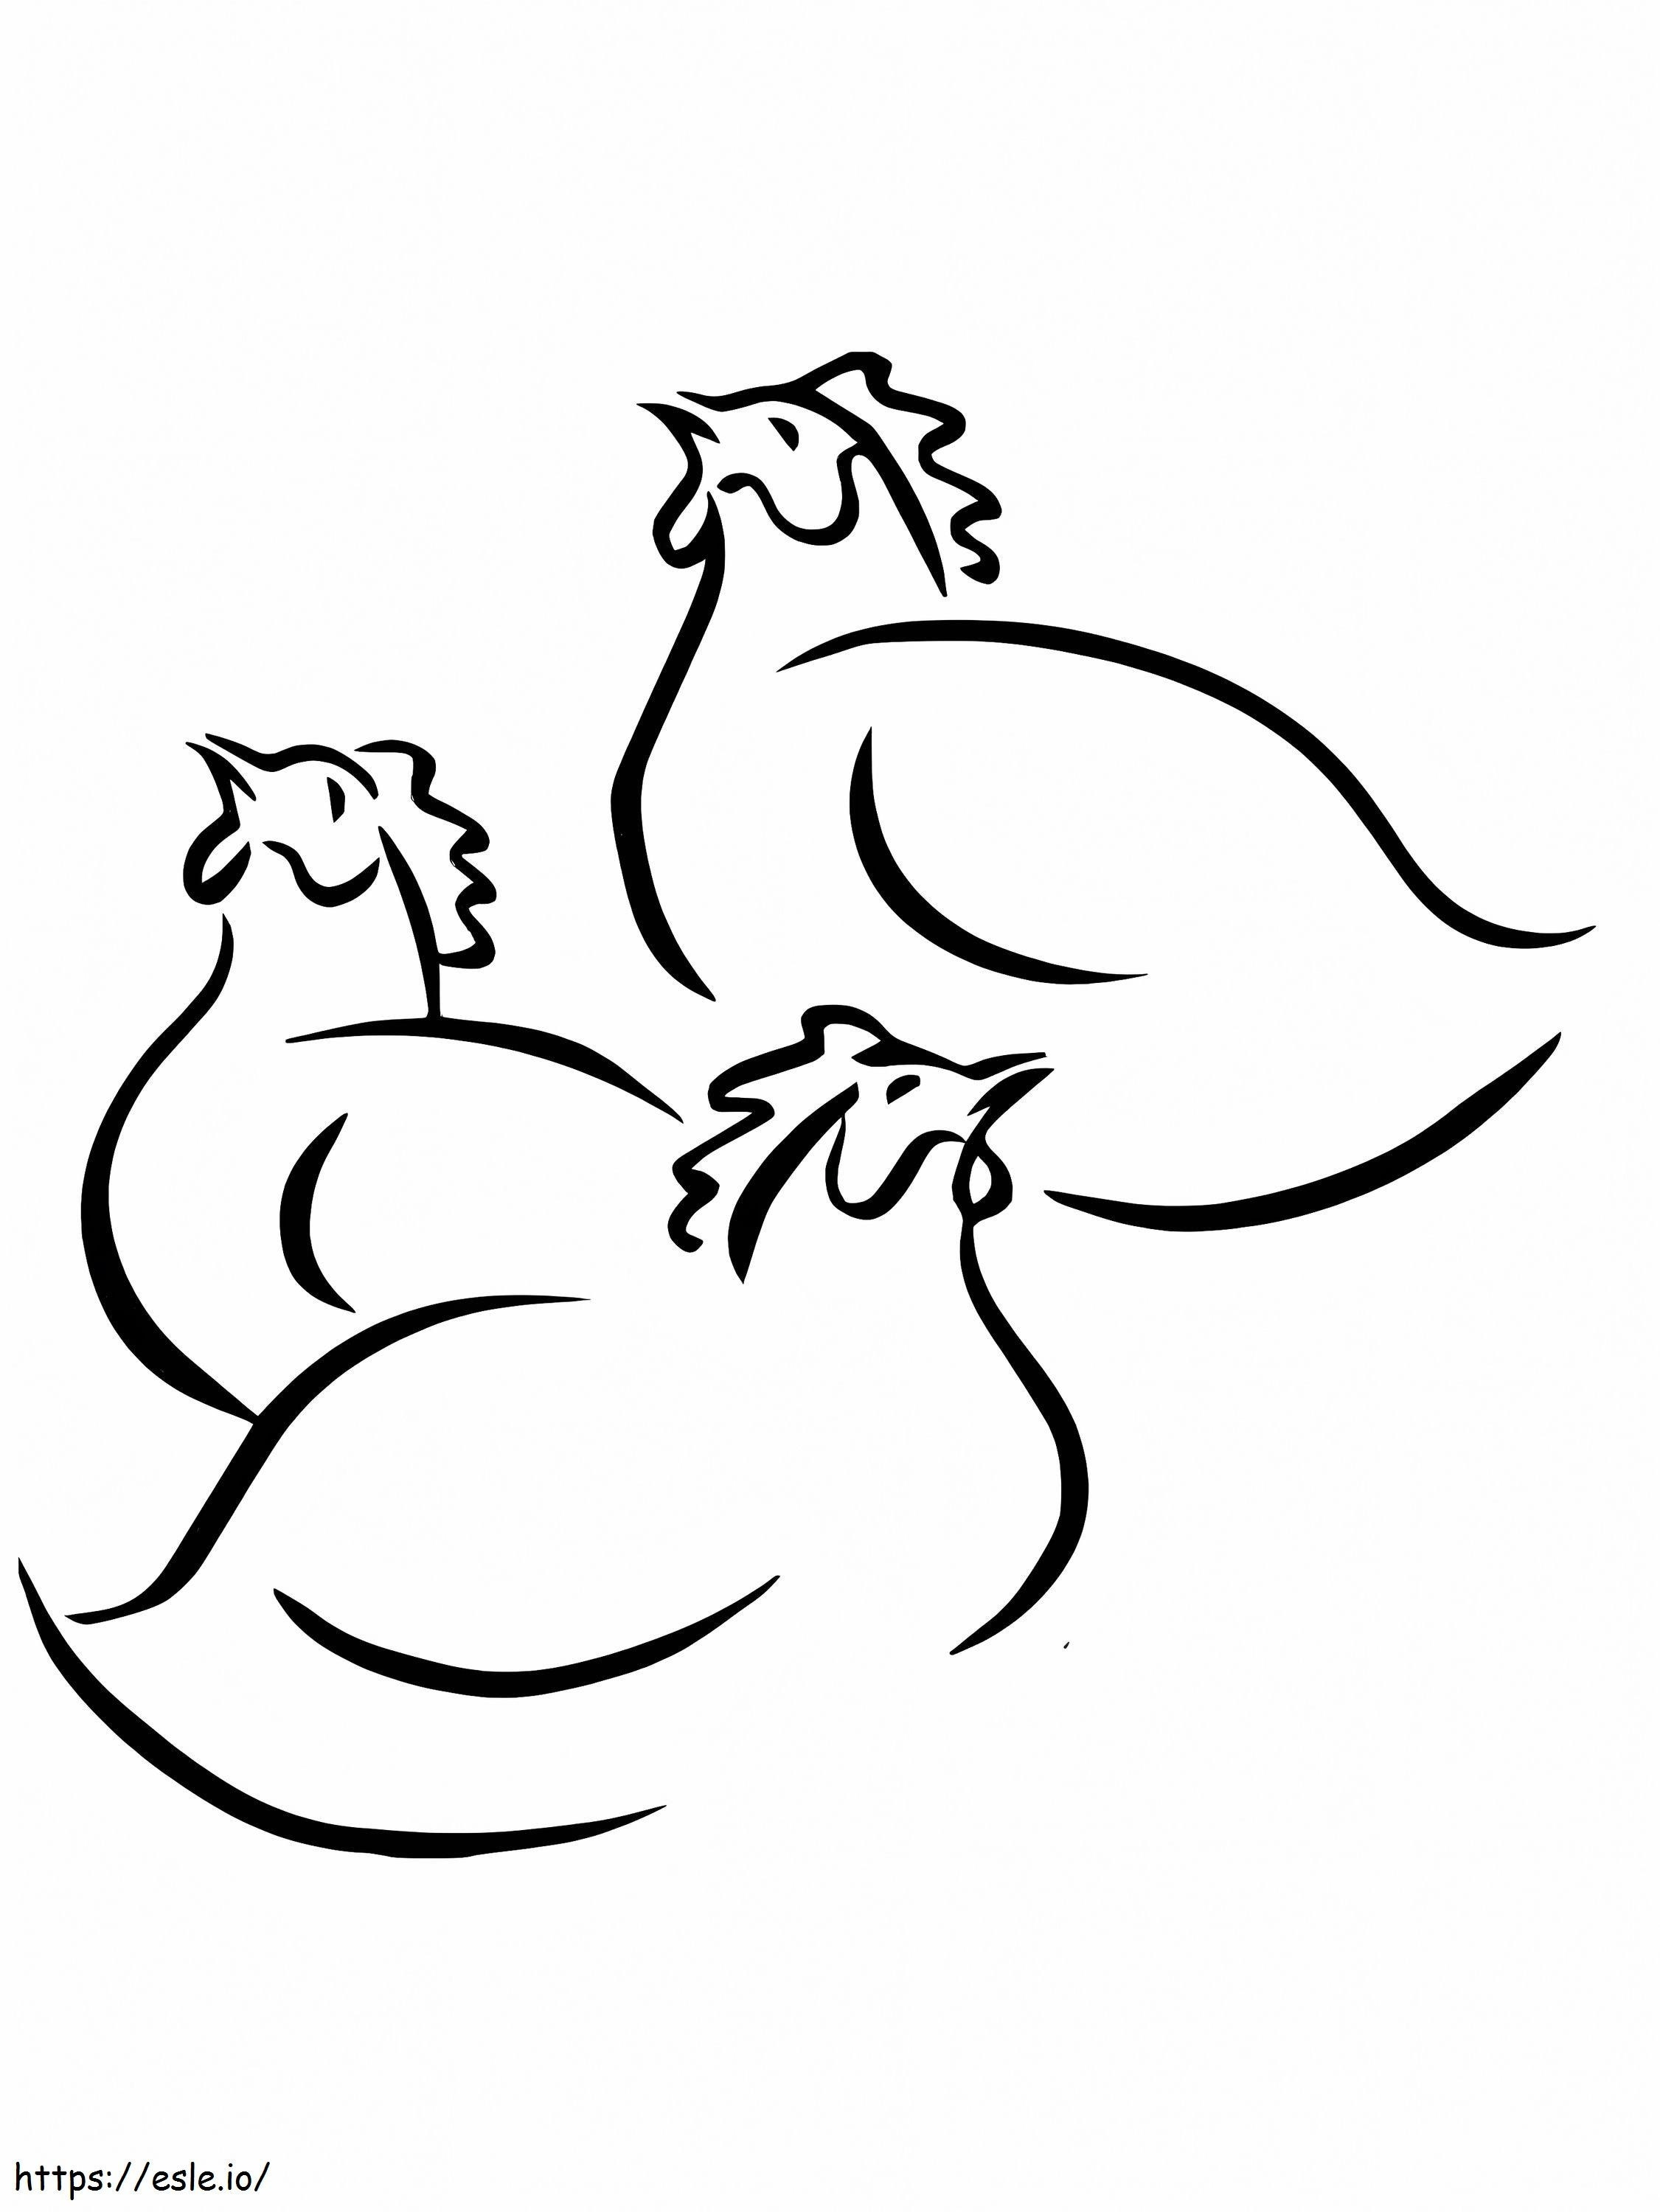 Three French Hens coloring page